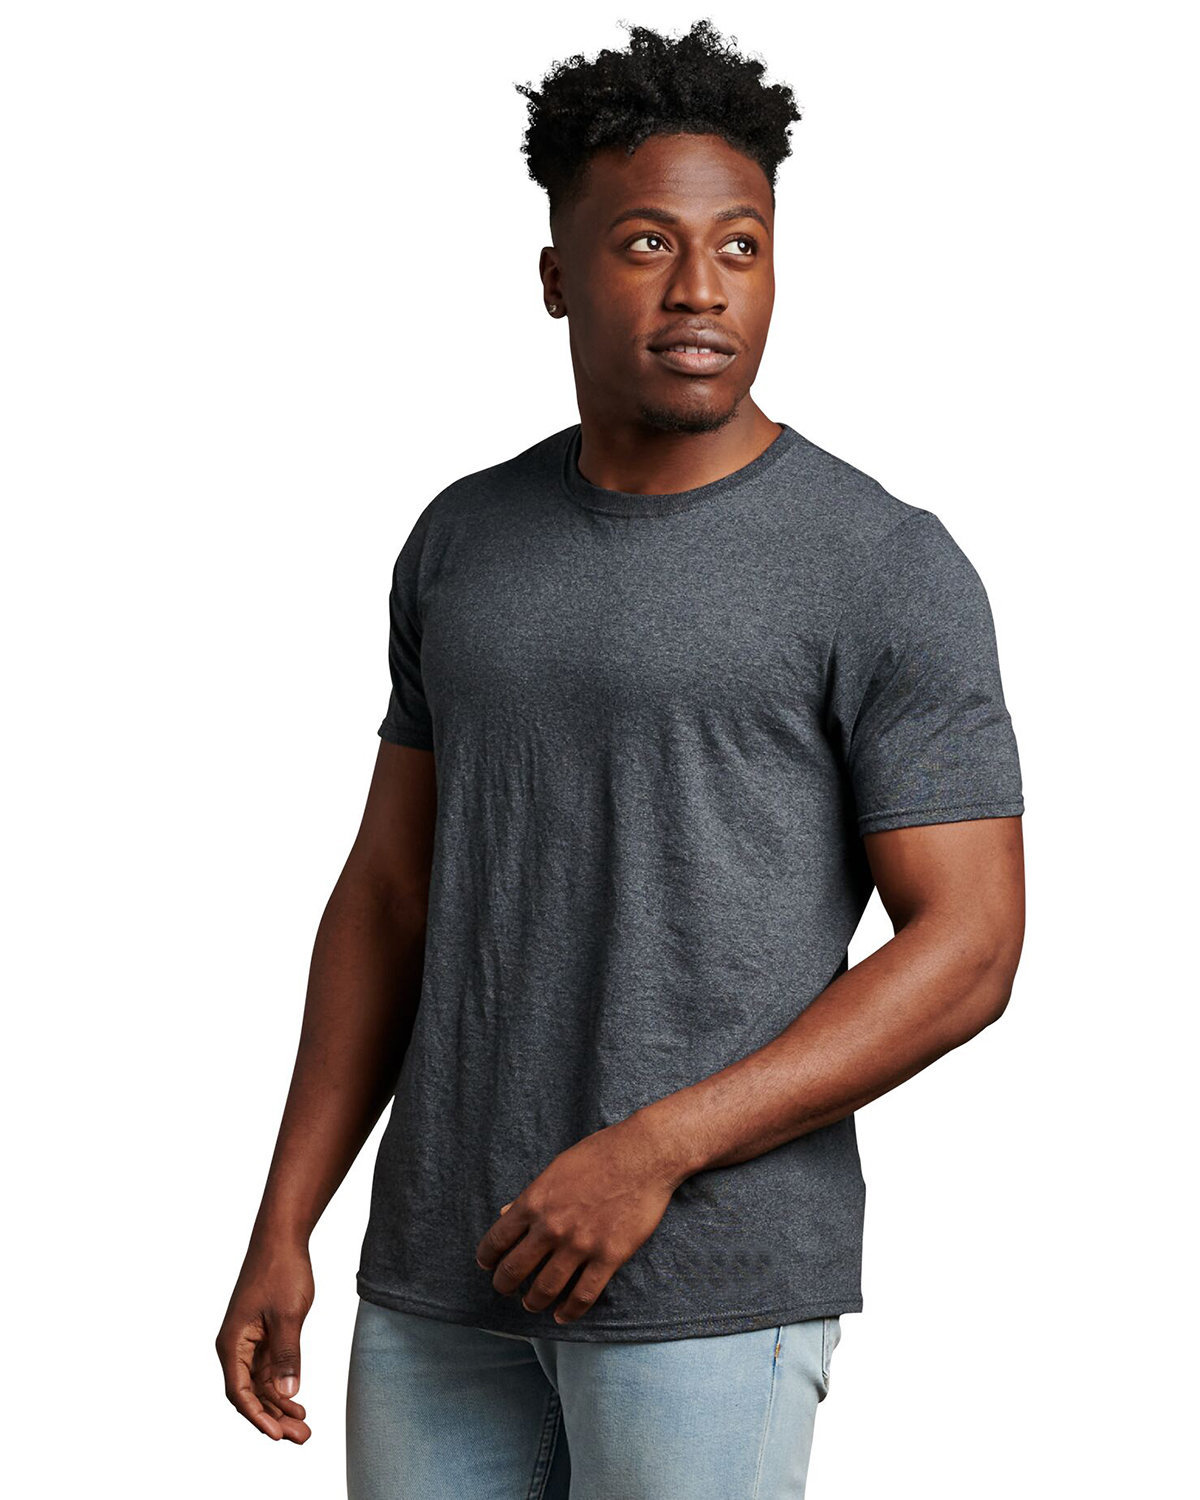 Russell Athletic Unisex Cotton Classic T-Shirt CHARCOAL GREY 